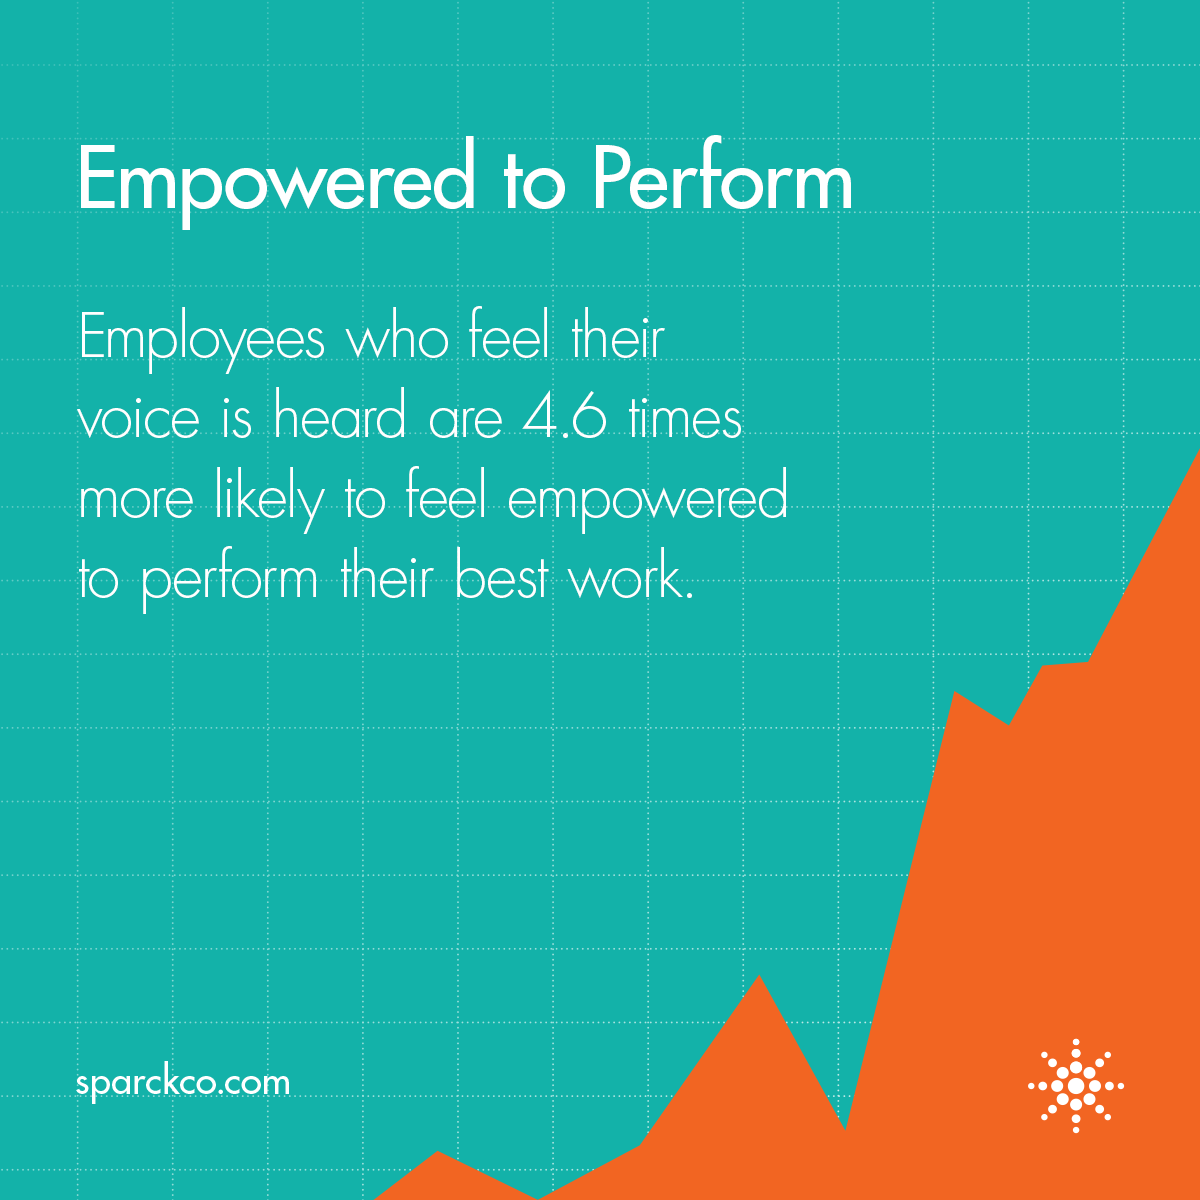 Employees who feel their voice is heard are 4.6 times more likely to feel empowered to perform their best work.